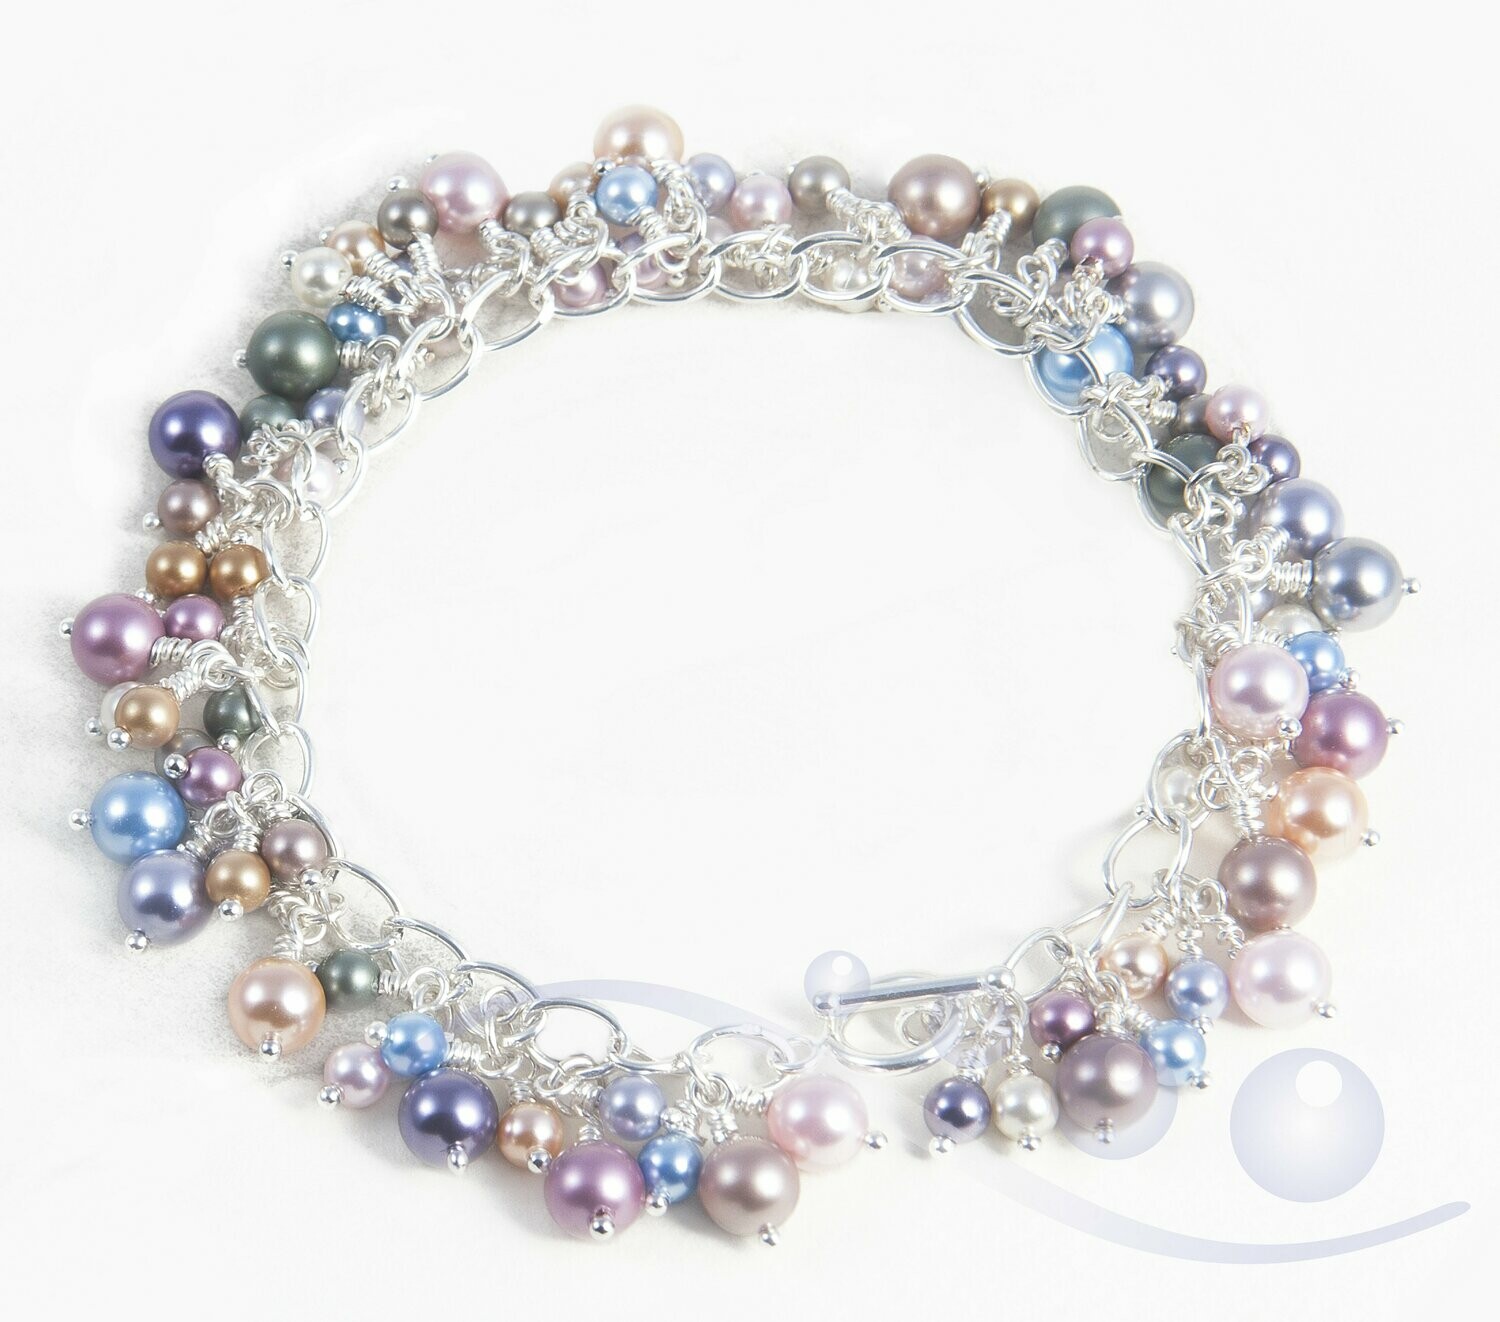 Pastel pearl bracelet with Swarovski crystals on Sterling Silver chain